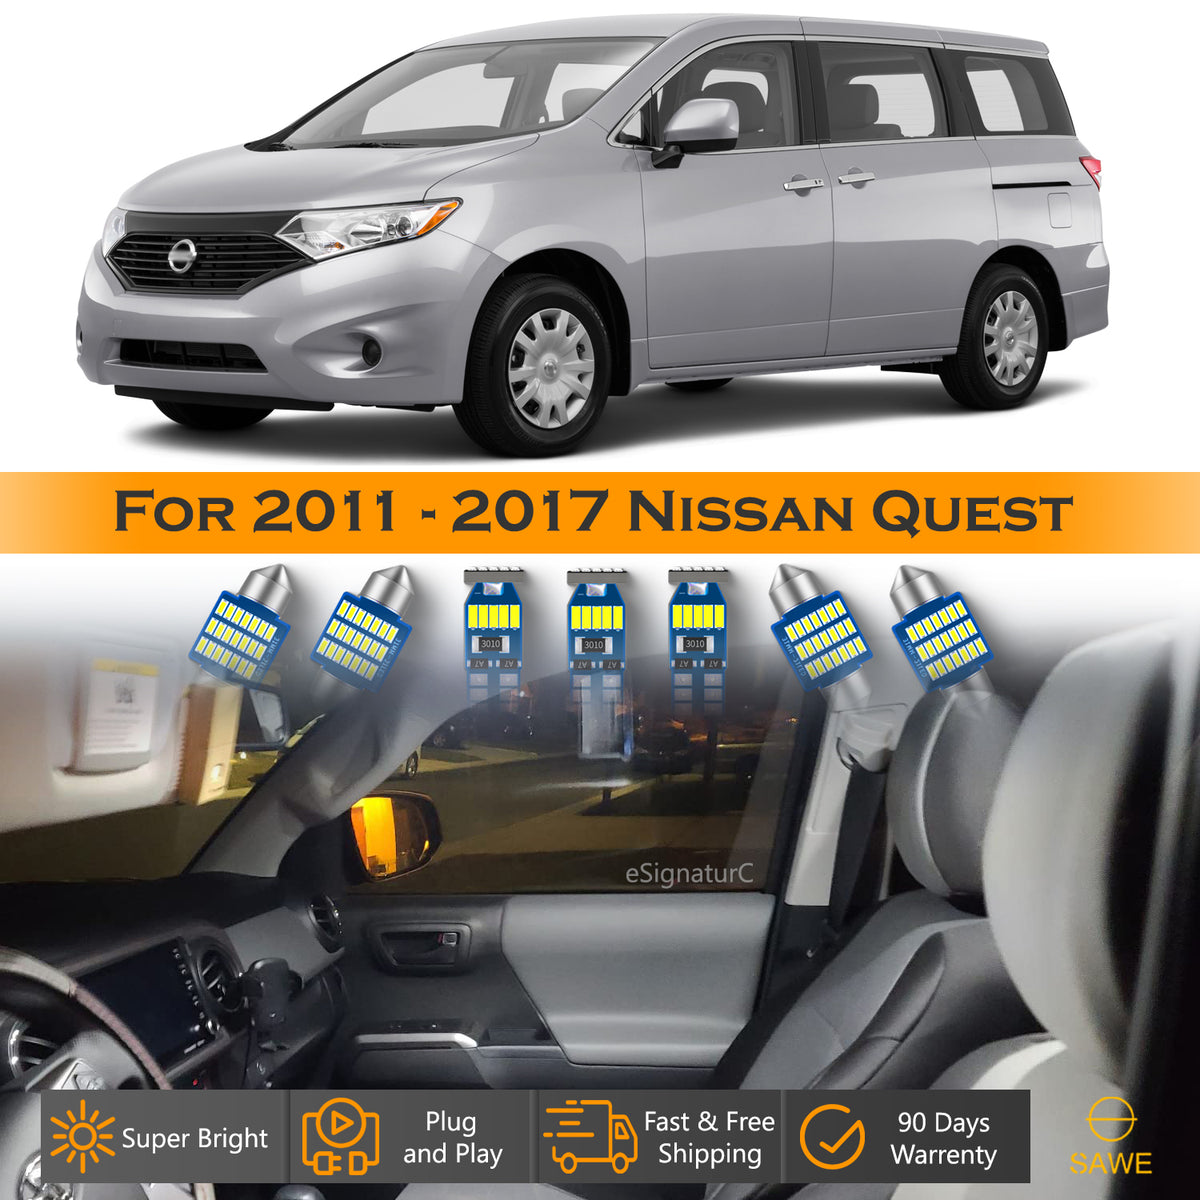 For Nissan Quest Interior LED Lights - Dome & Map Light Bulbs Package Kit for 2011 - 2017 - White